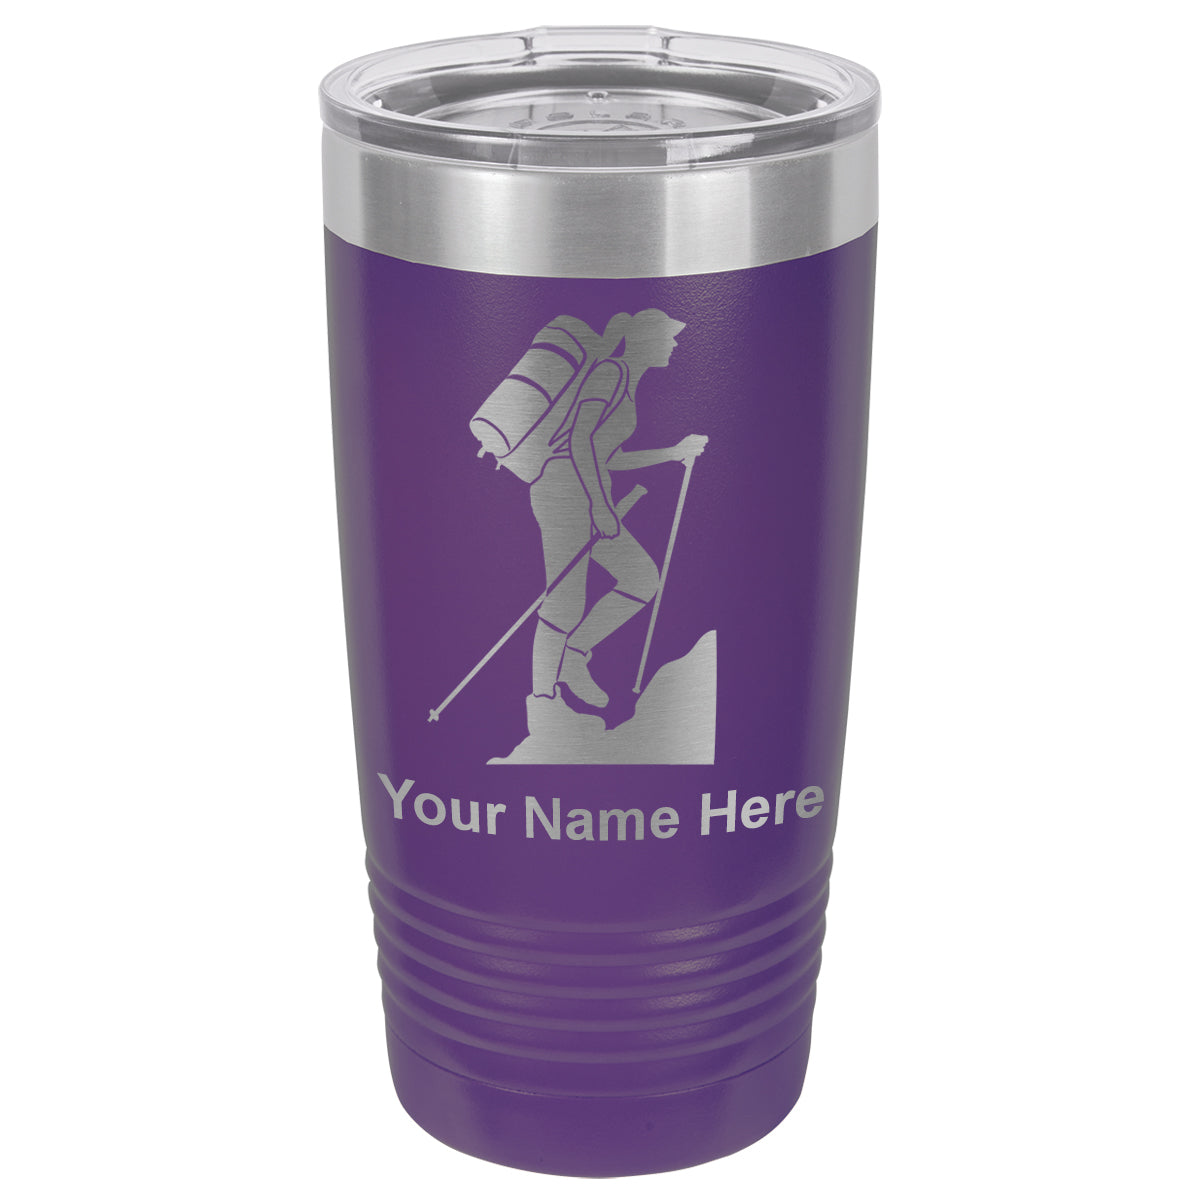 20oz Vacuum Insulated Tumbler Mug, Hiker Woman, Personalized Engraving Included